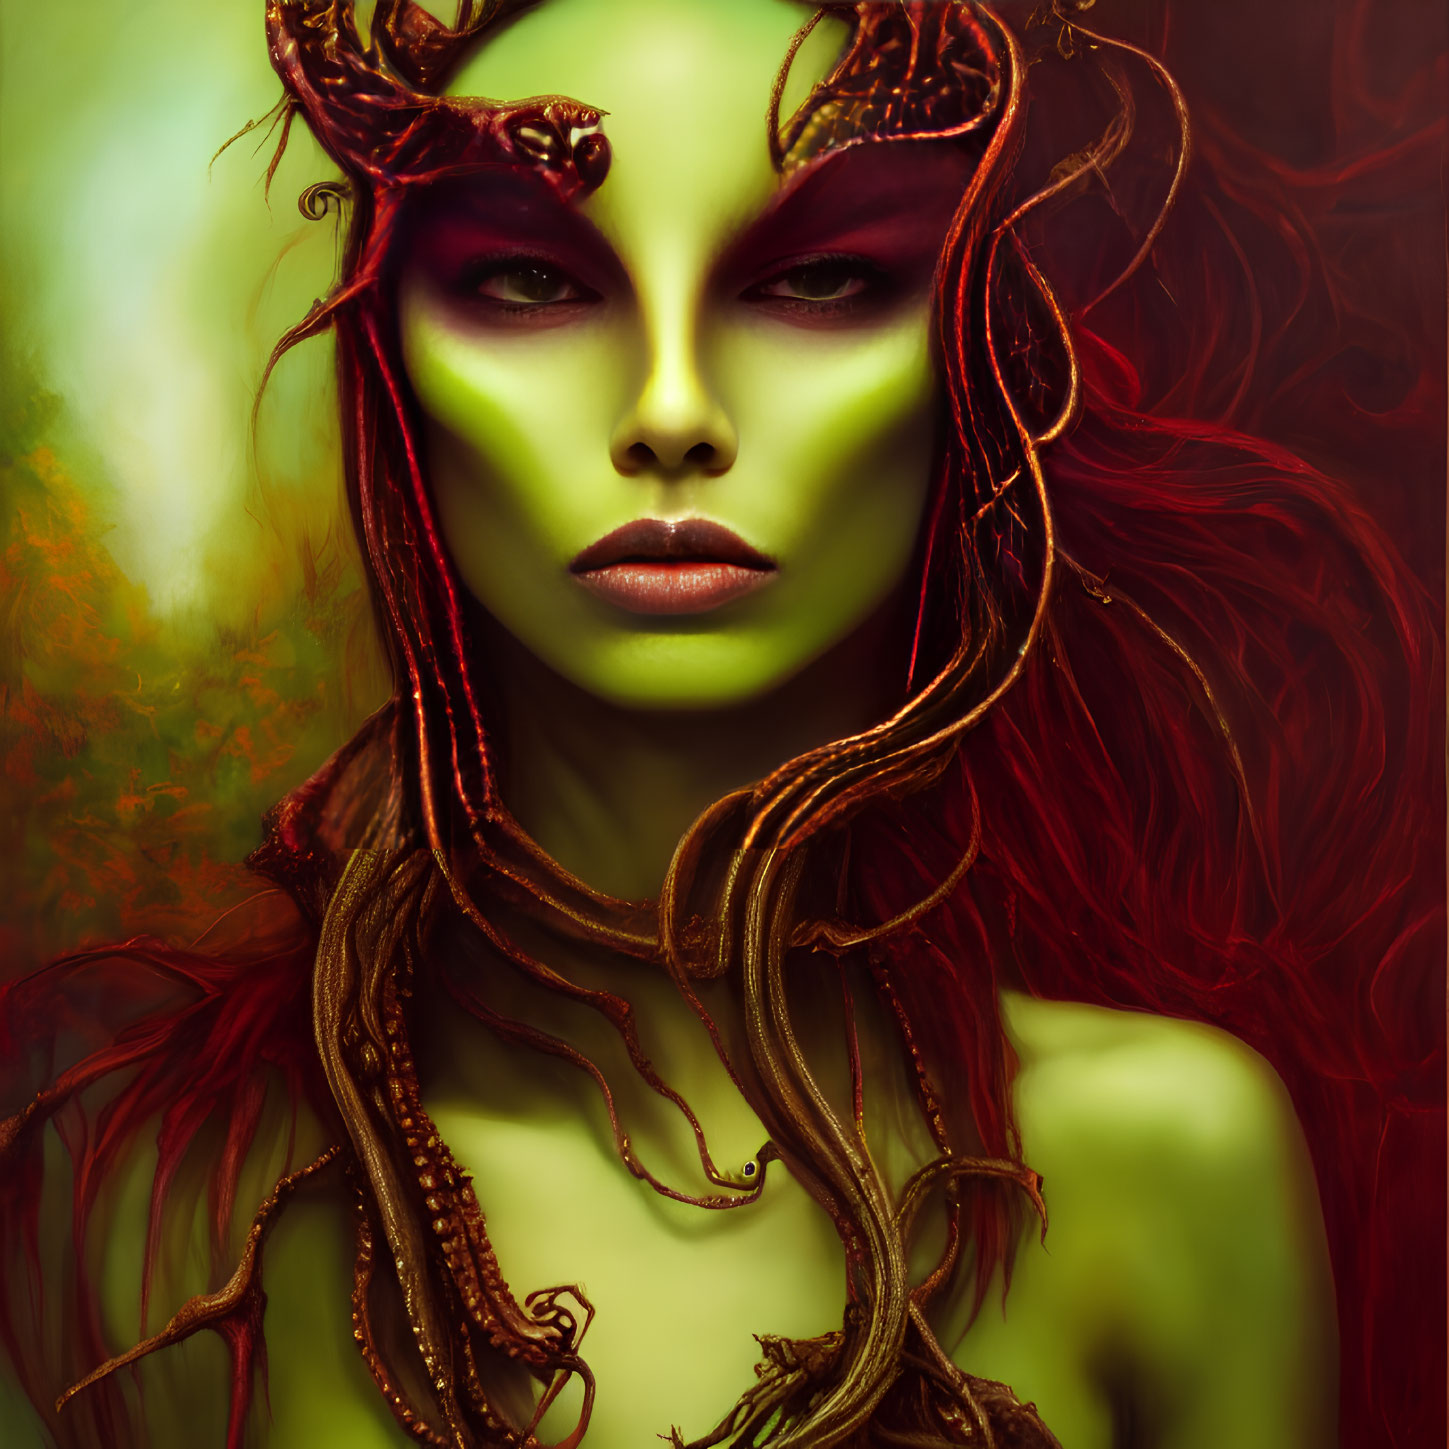 Vivid Green-Skinned Fantasy Figure with Elaborate Horned Headpiece in Red Ambiance